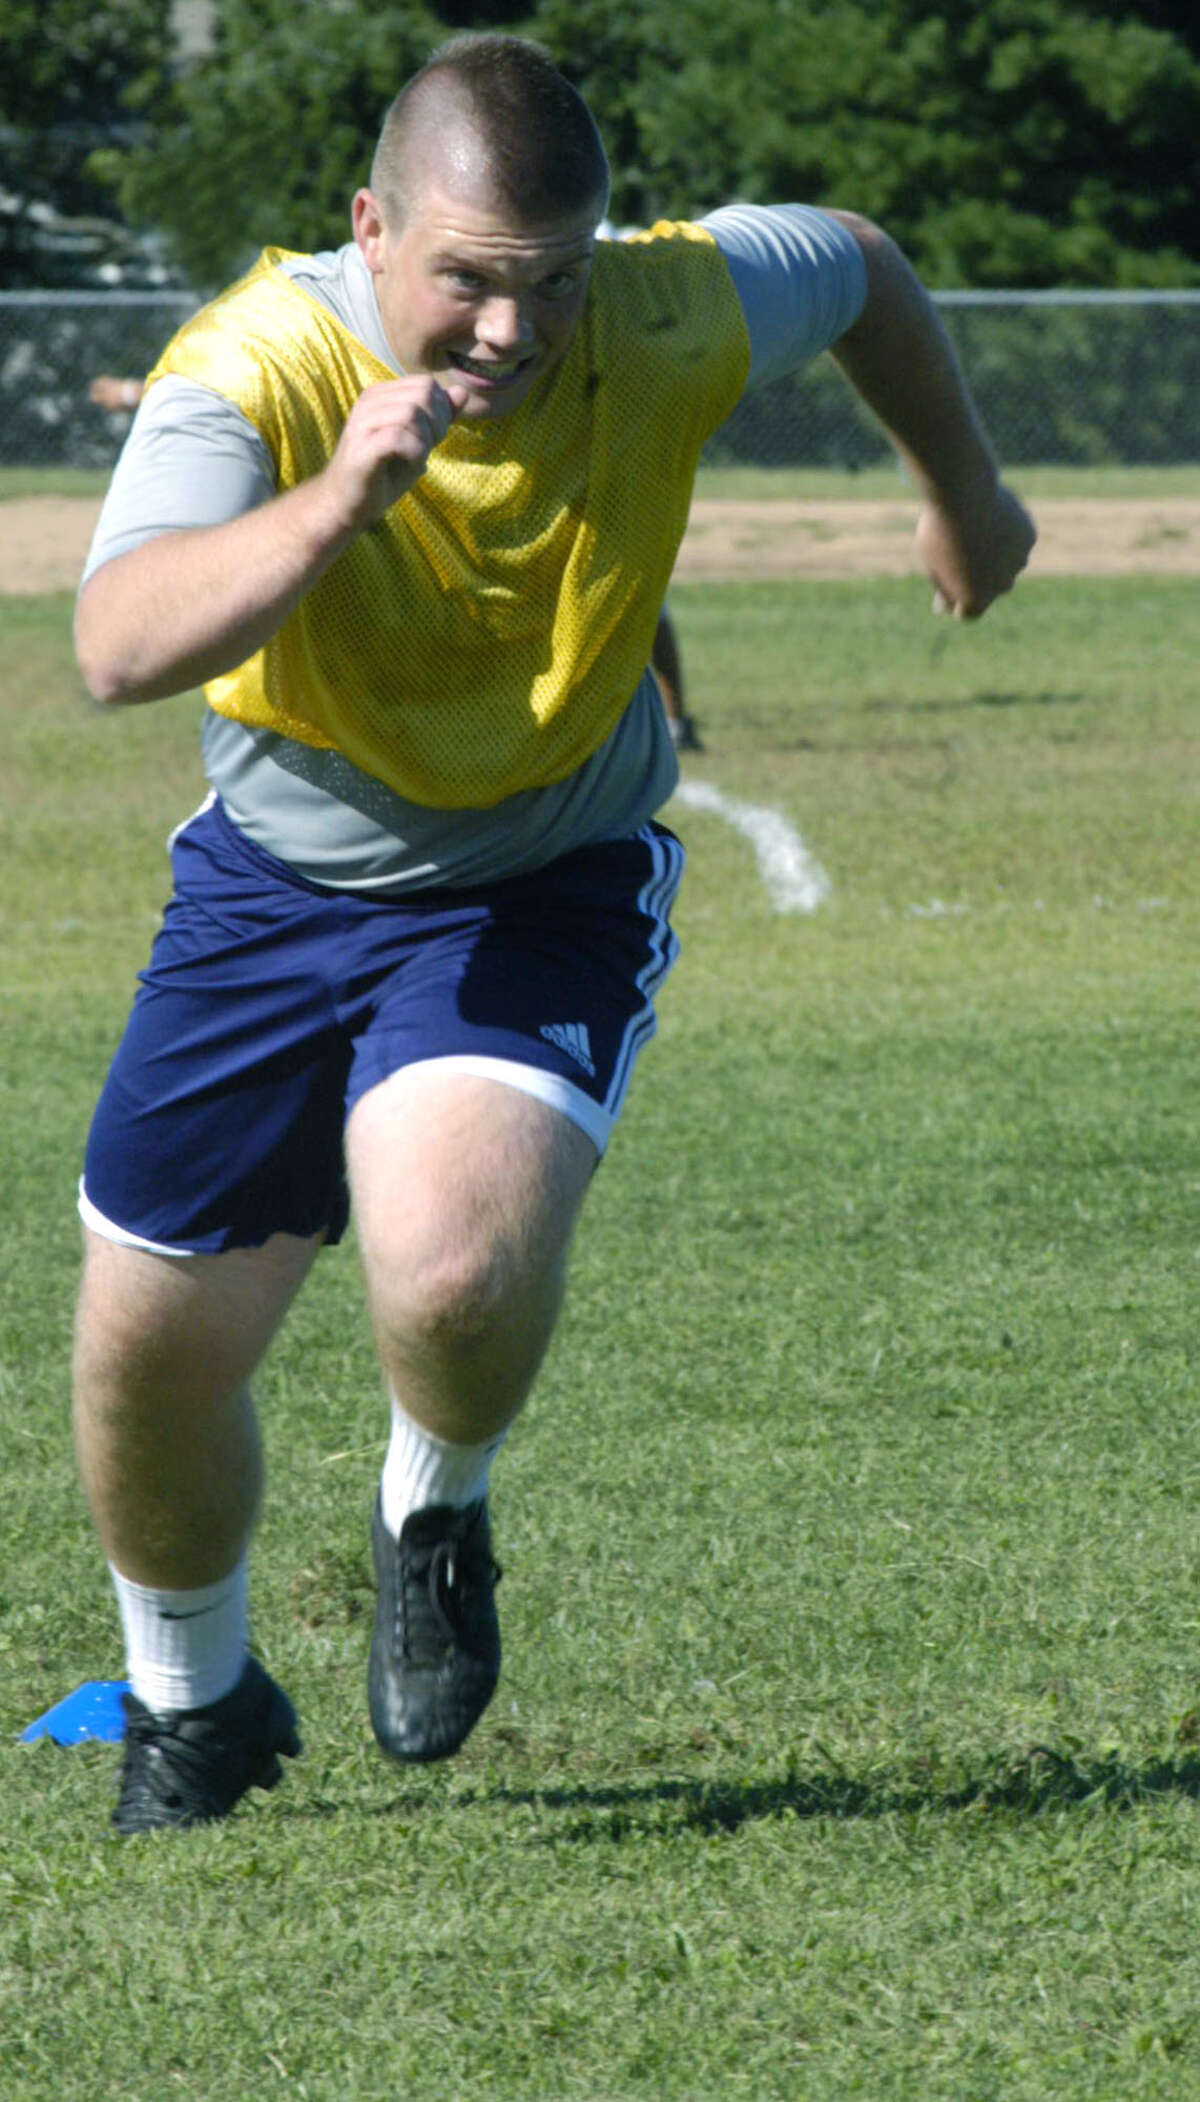 The Green Wave's Ben Bayers gives 100 percent during a testing pre-season fitness drill for New Milford High School boys' soccer, September 2012